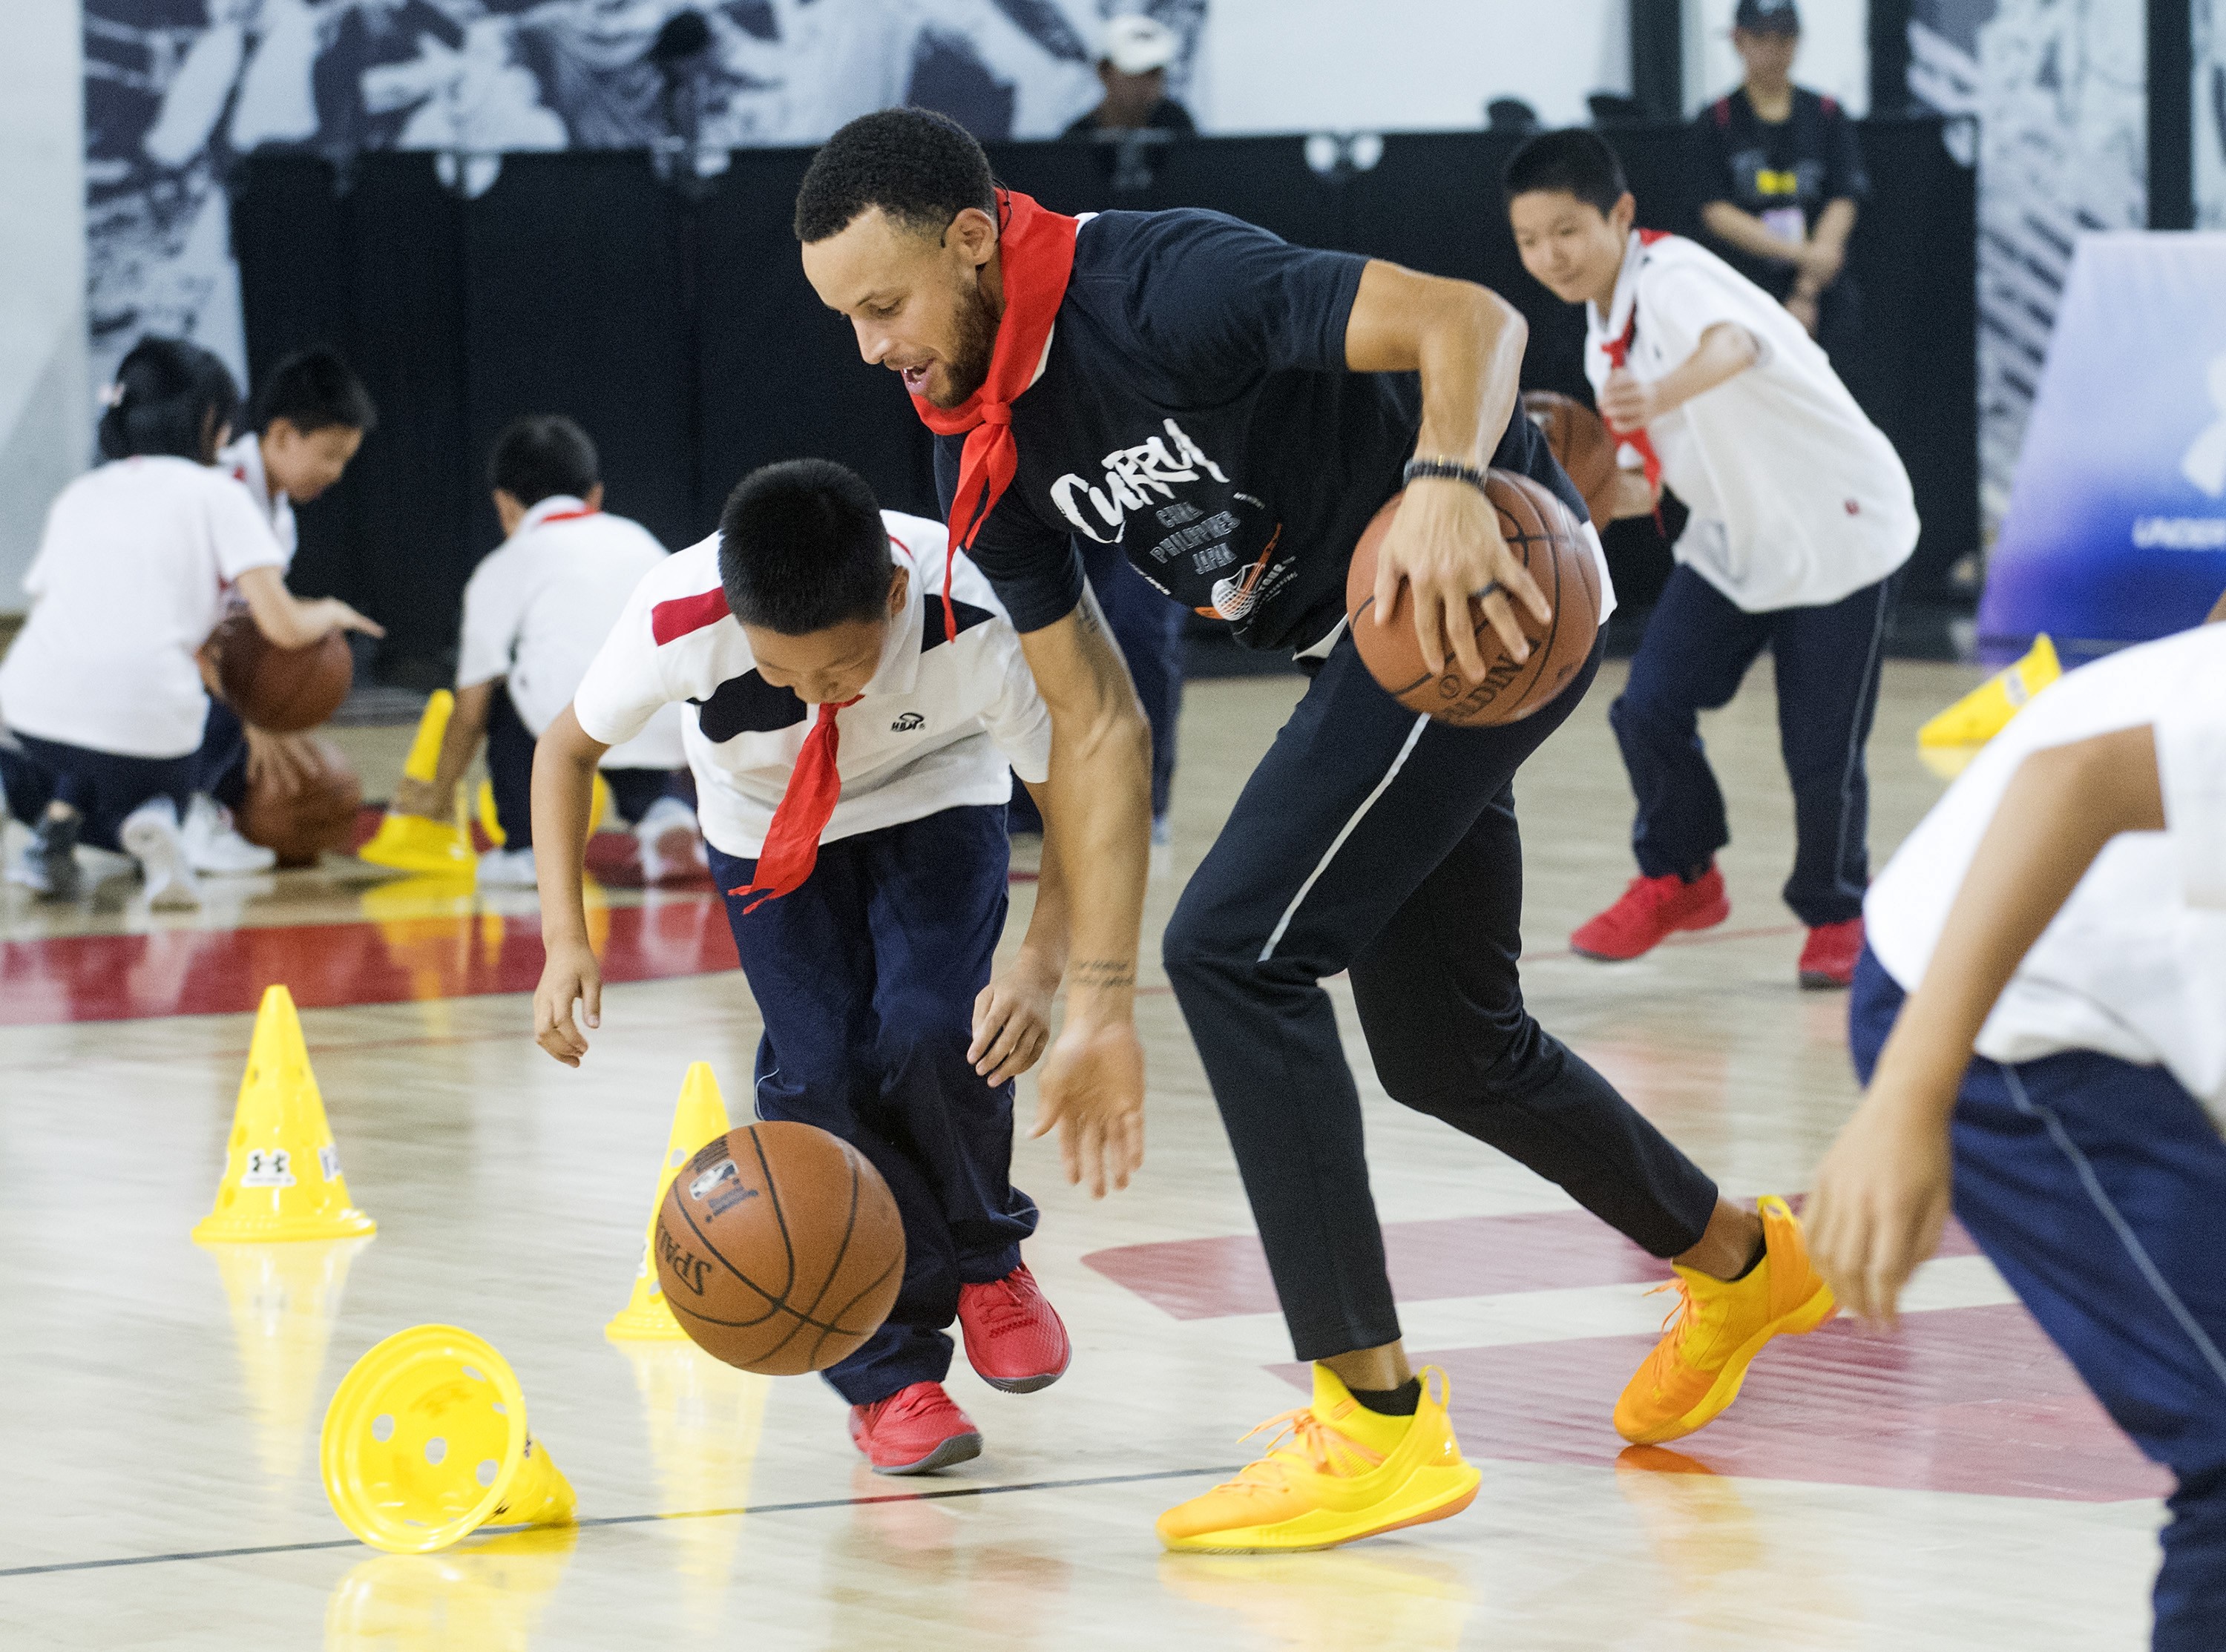 NBA player Stephen Curry at a training session with middle school students in Wuhan, China, last year. China has dropped the ball when it comes to the NBA and its diplomatic importance. Photo: Xinhua